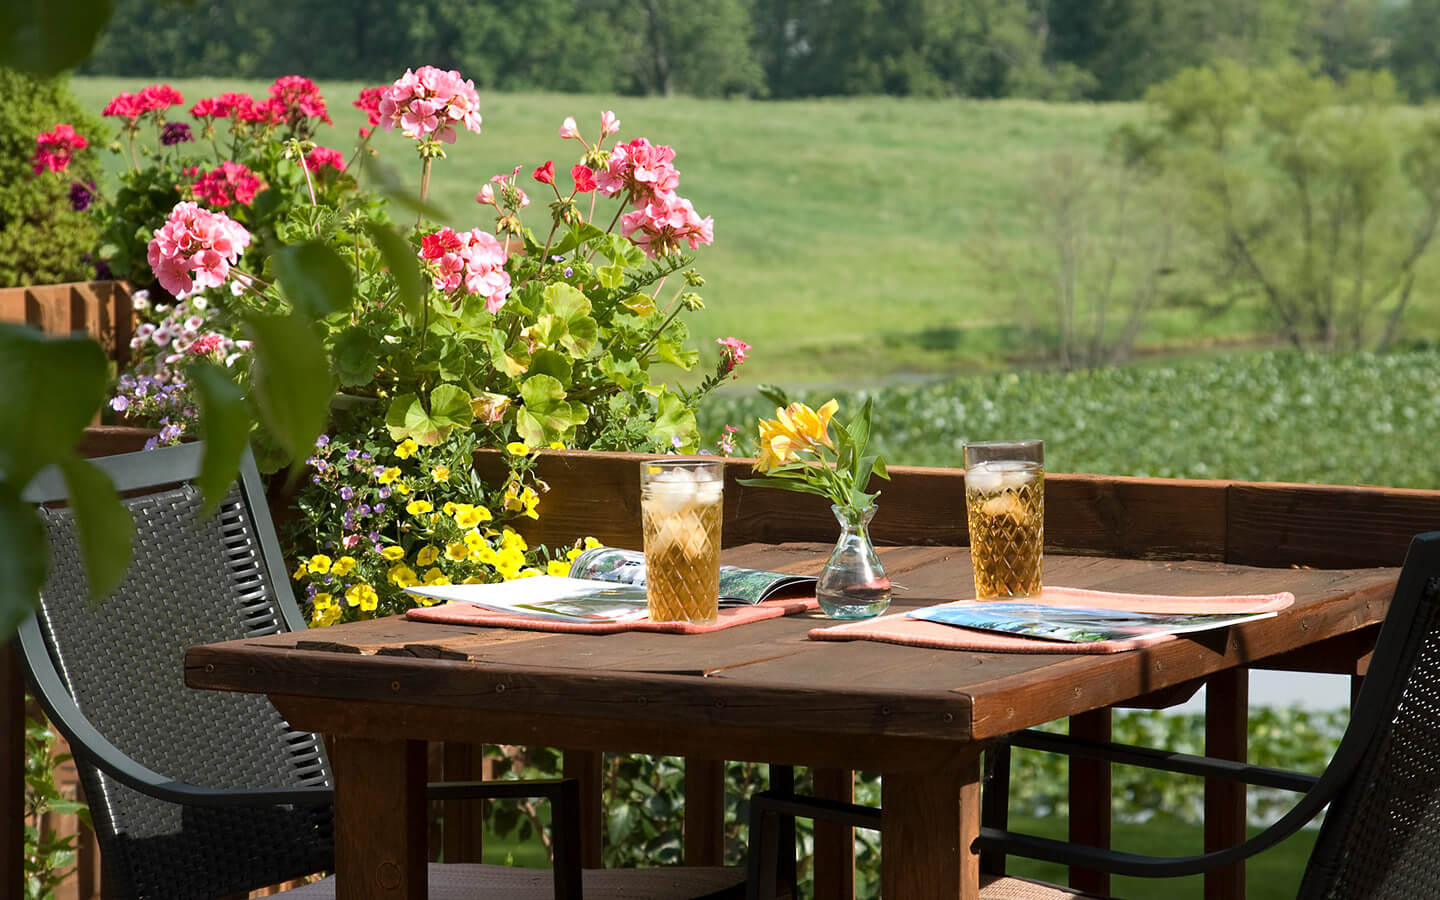 Table for two on the deck overlooking the pond with iced tea on table